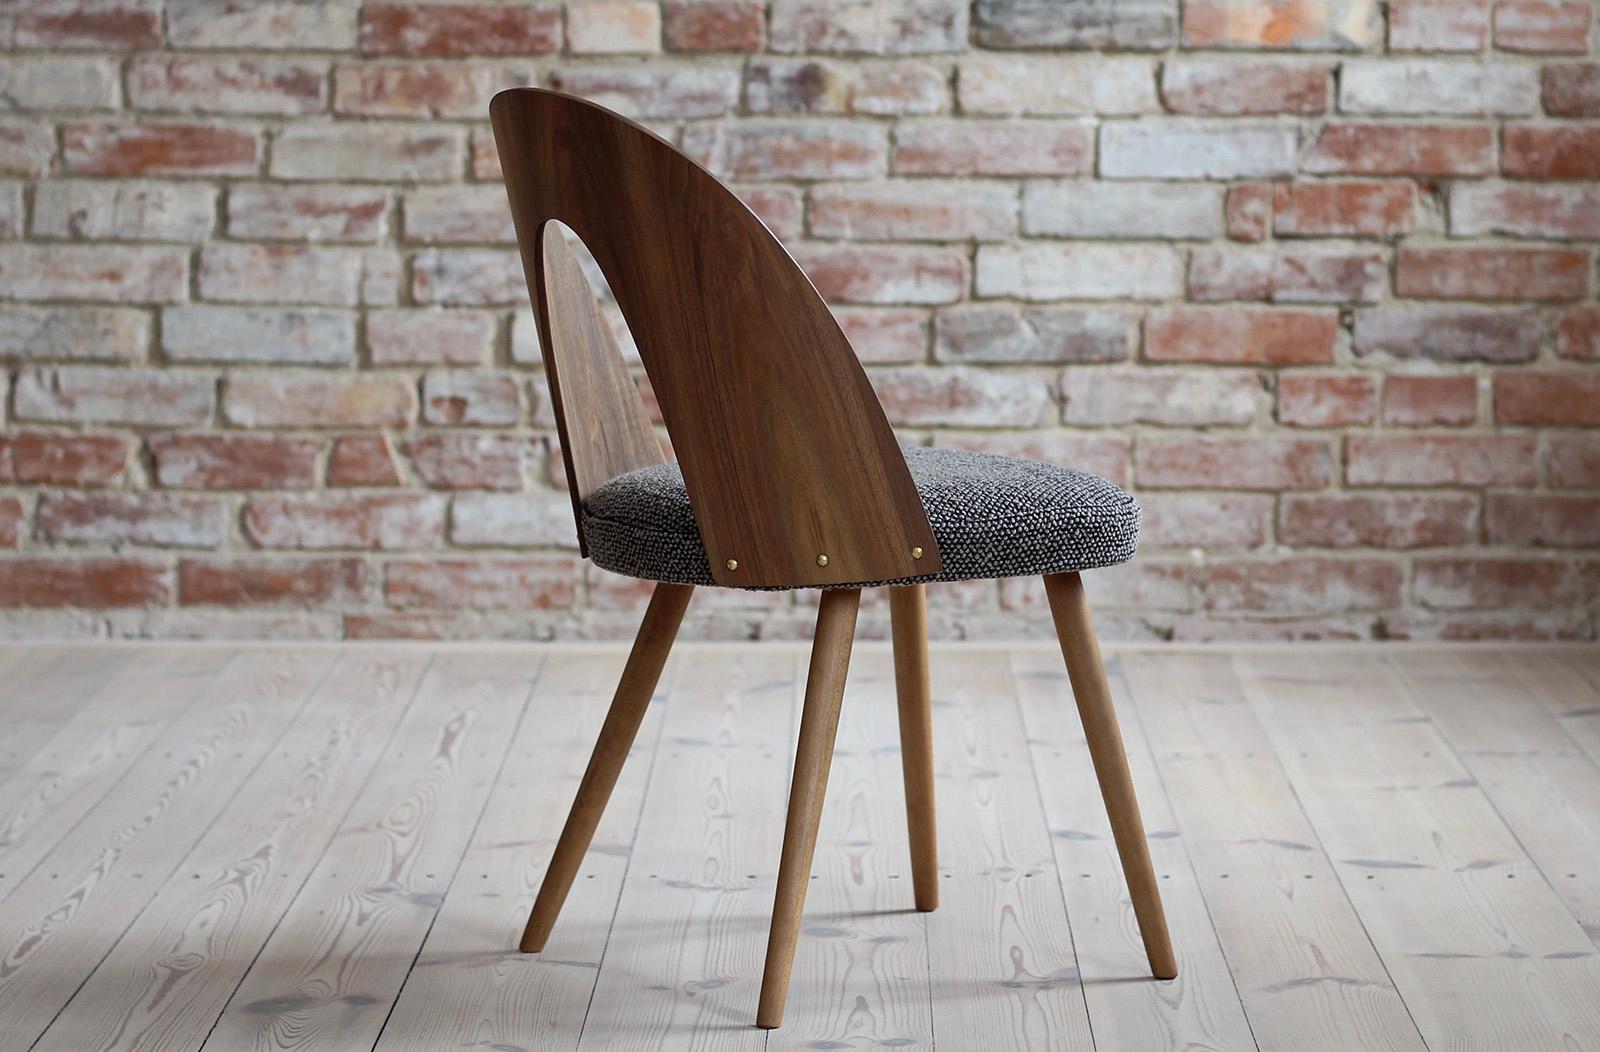 Walnut Set of 4 Midcentury Dining Chairs by A. Šuman, Reupholstered in Kvadrat Fabric